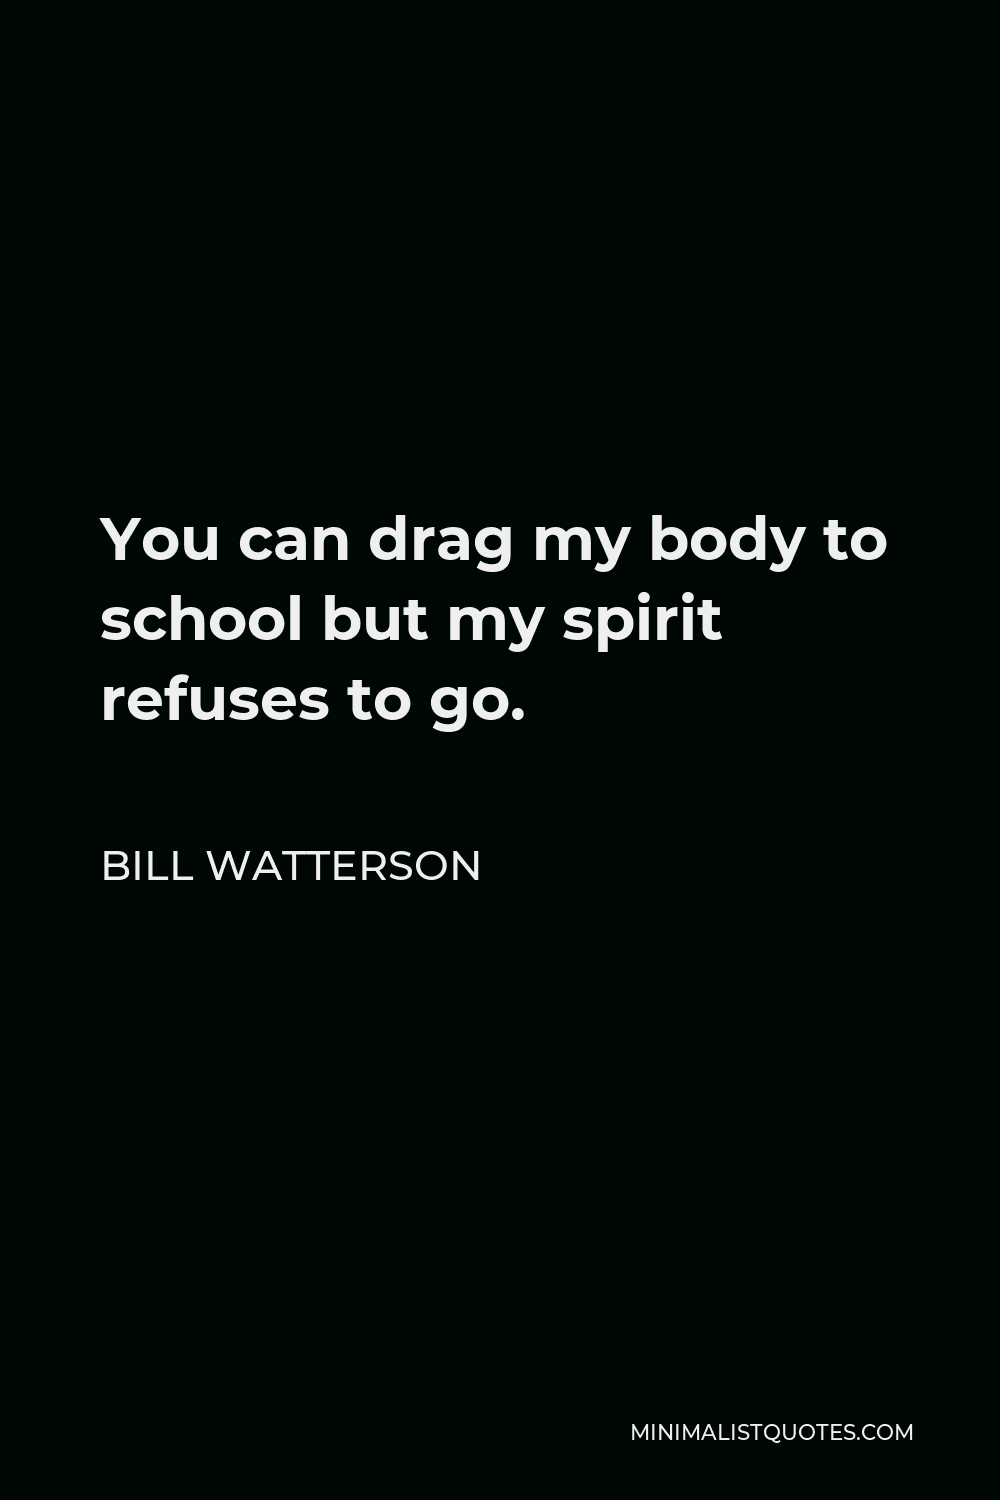 Bill Watterson Quote - You can drag my body to school but my spirit refuses to go.